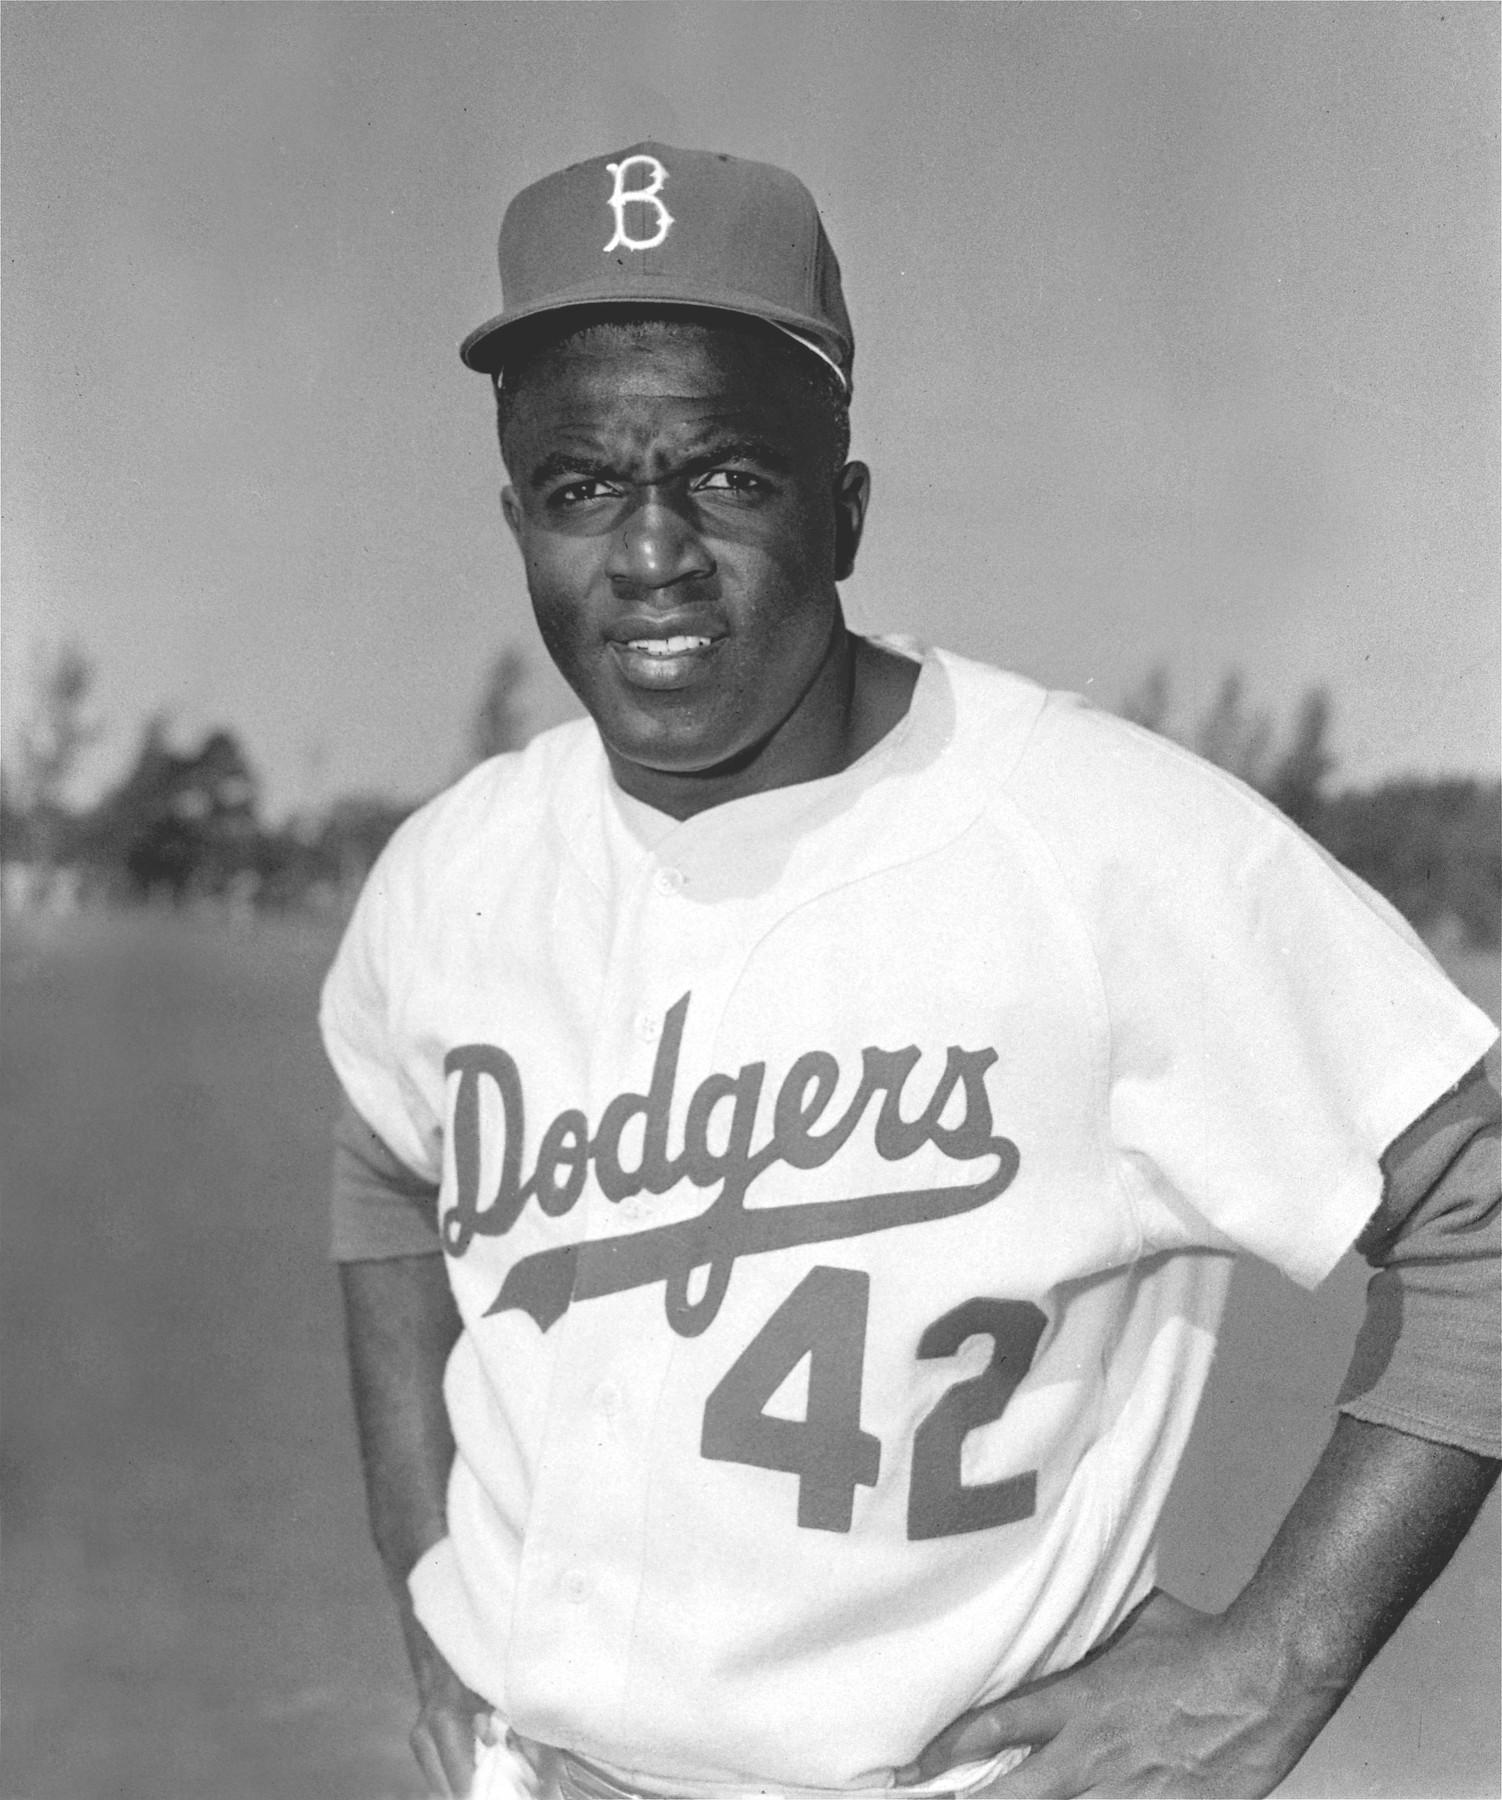 IV. Challenges Faced by Jackie Robinson in MLB